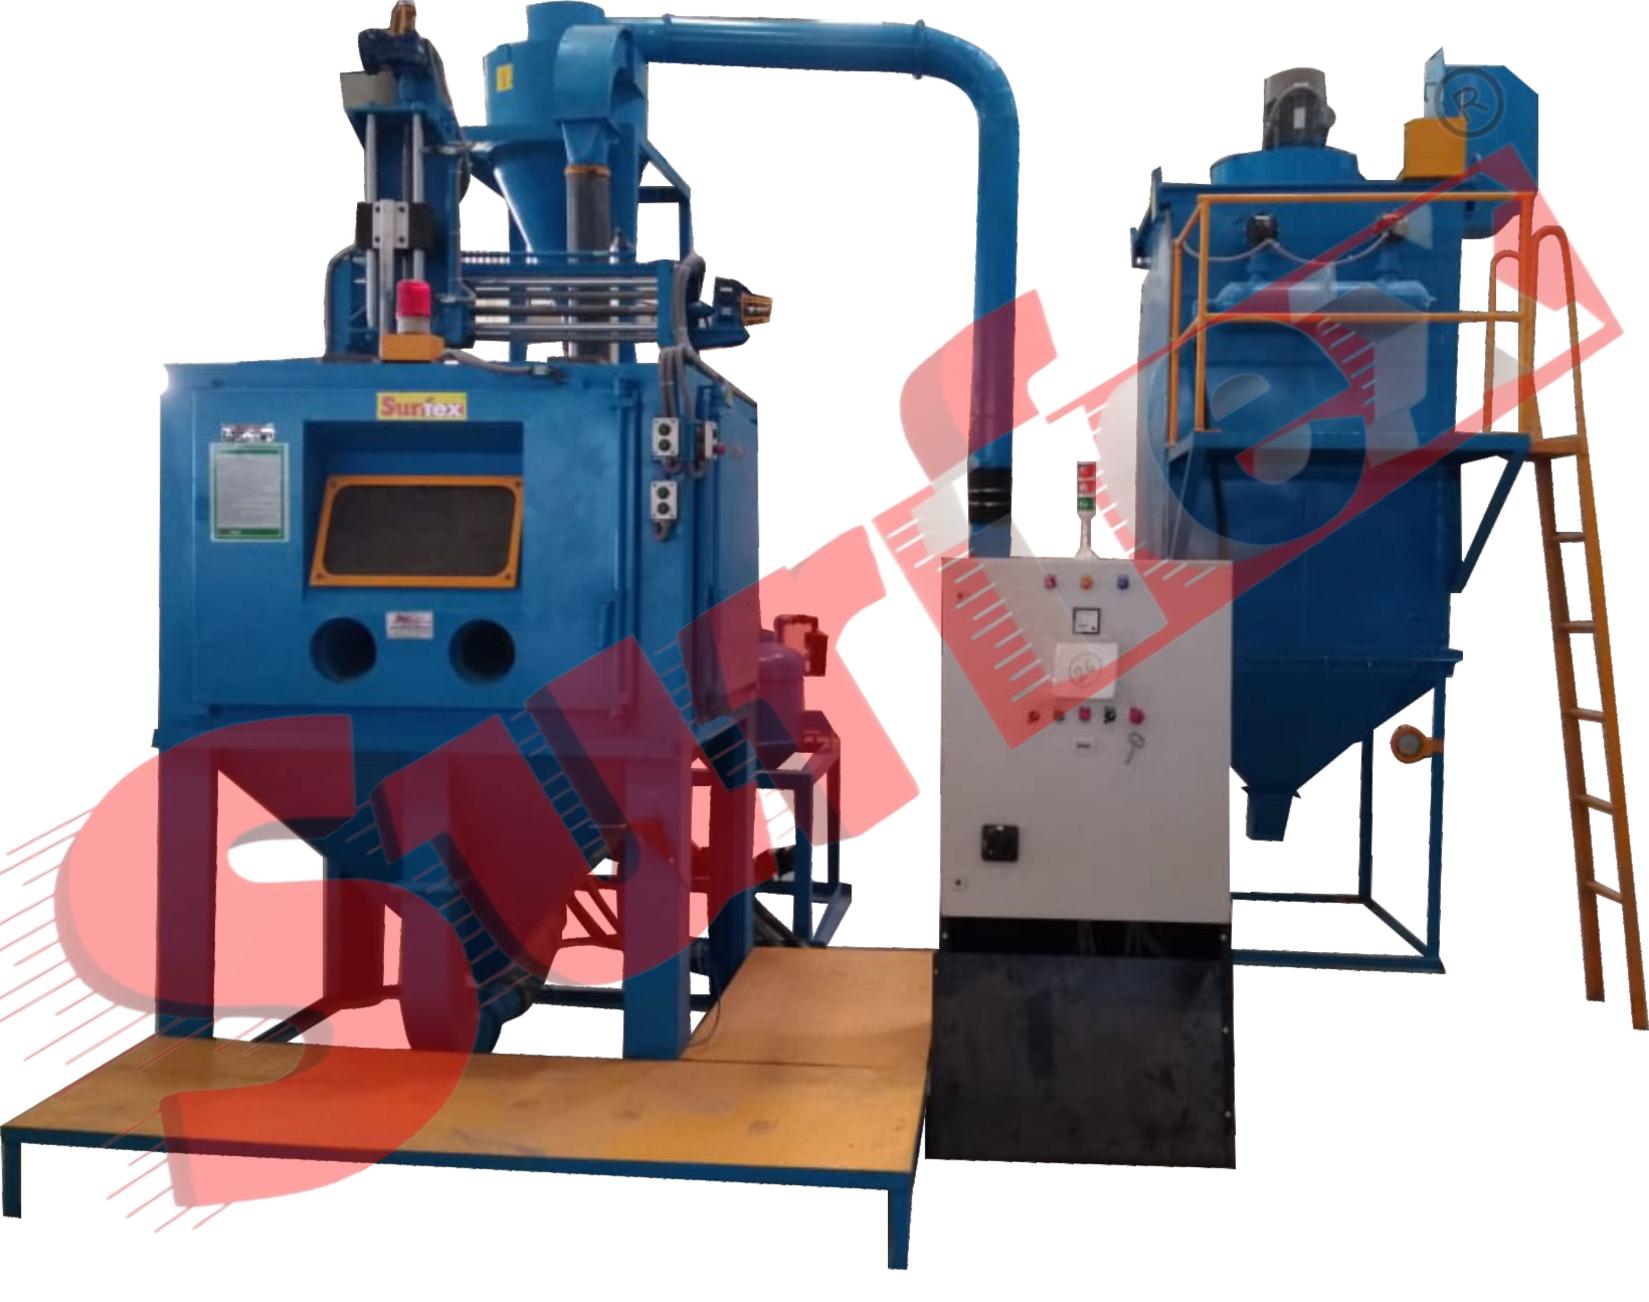 Page-4-Section-3- Sub Section-2- shot peening machine for gas & oil industry